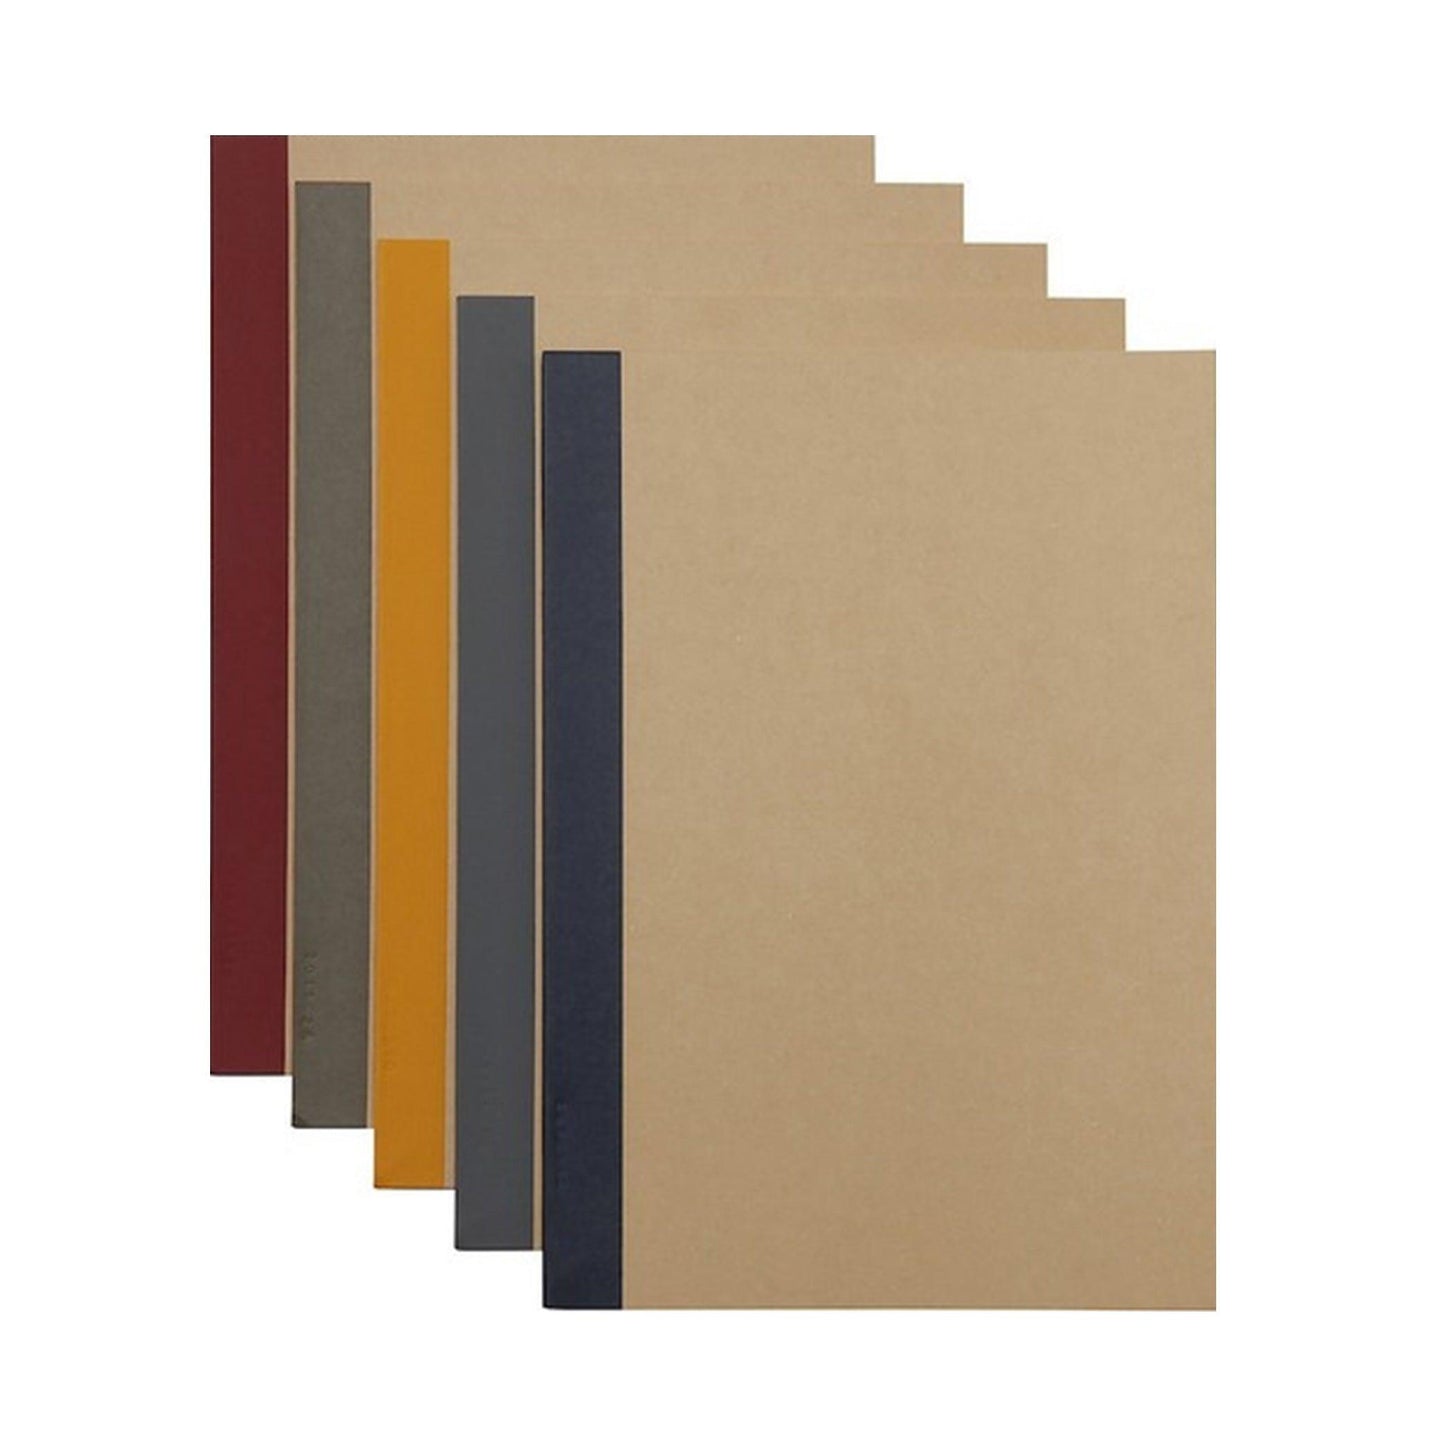 Notebook MUJI plain color 5 into the group not easy to see through B5 horizontal line note memo record environmental protection student school stationery office 76539636 - CHL-STORE 